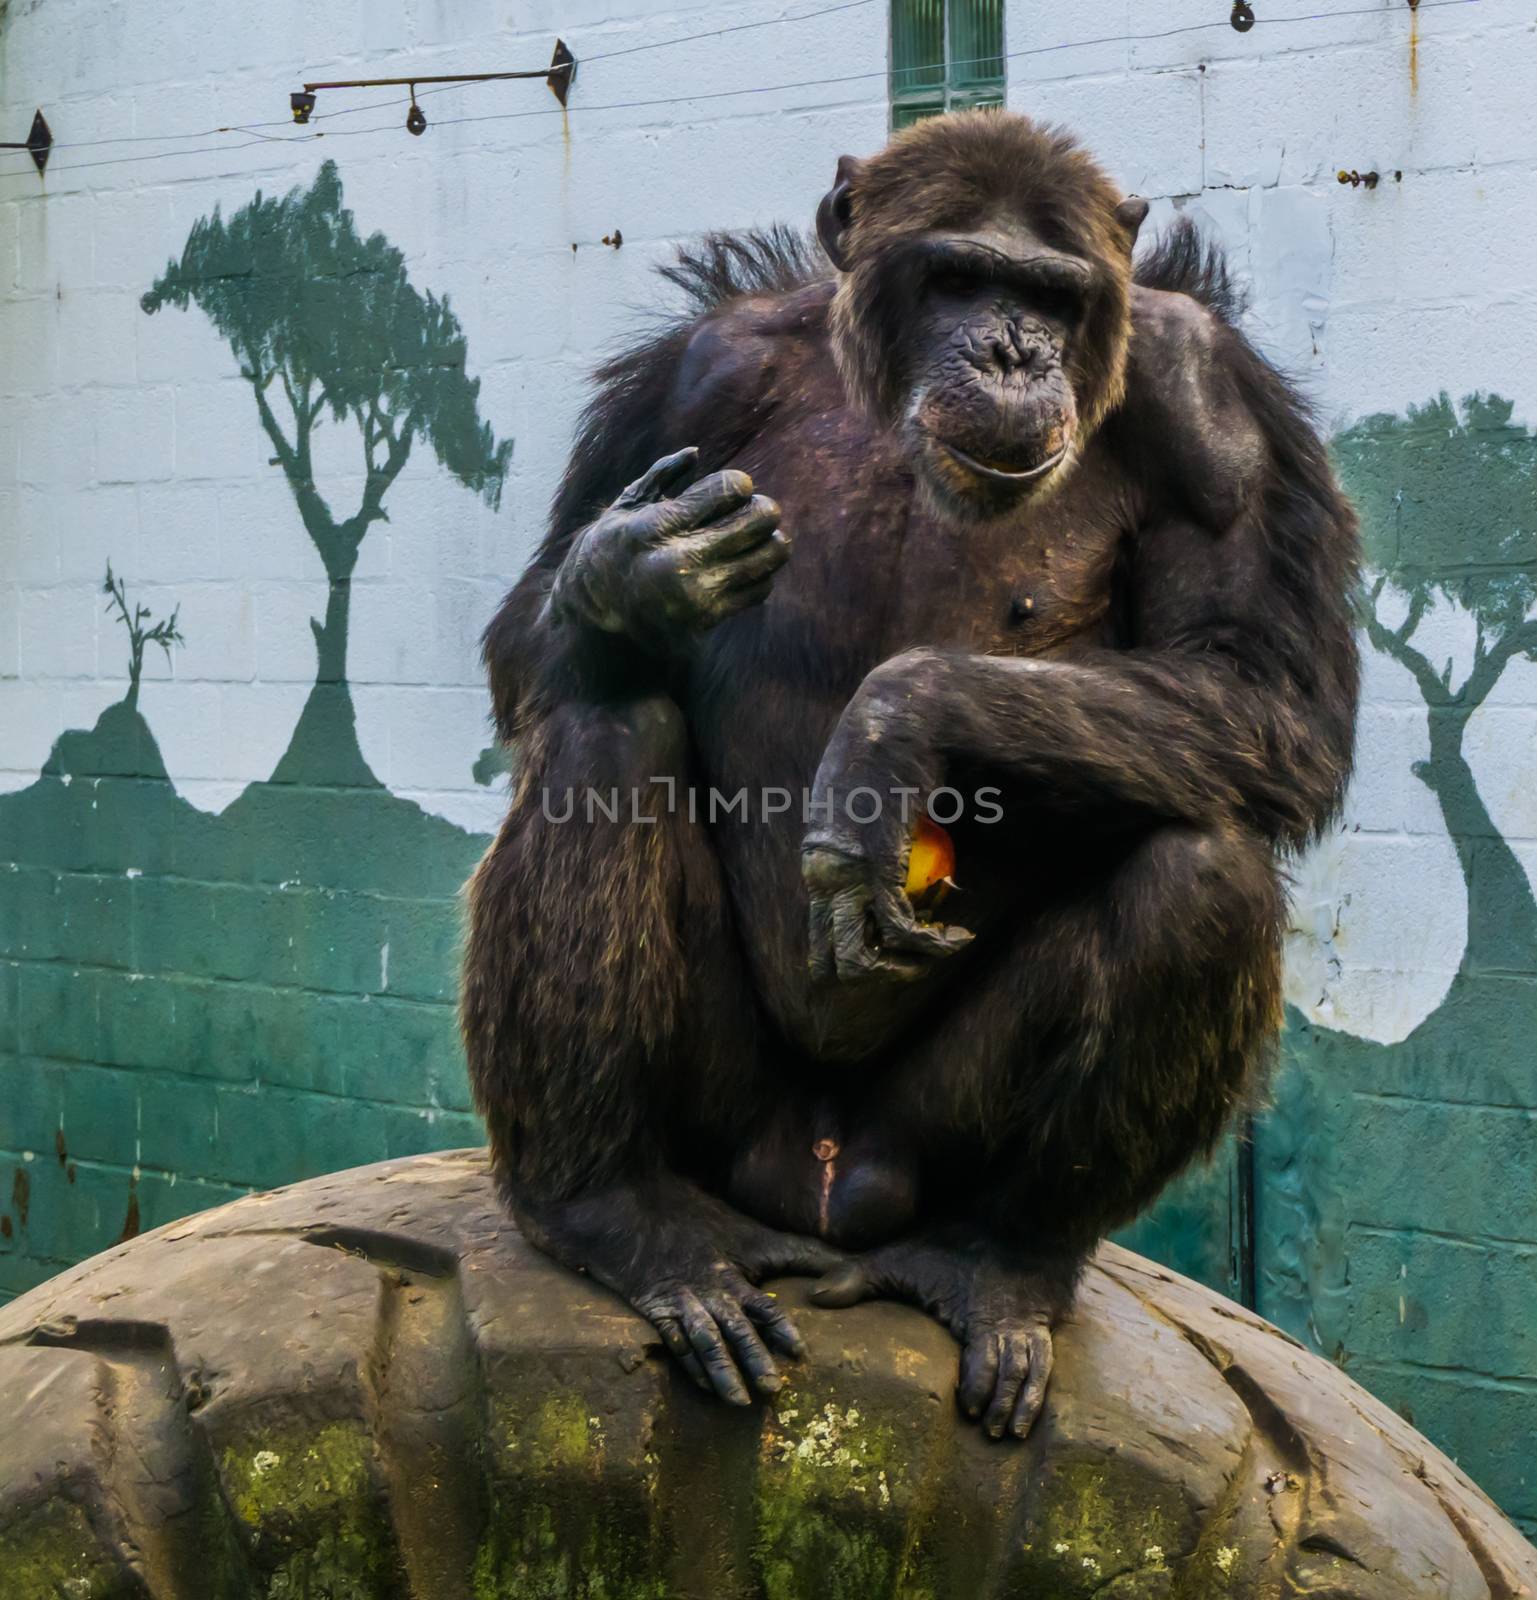 portrait of a big black chimpanzee sitting a car tire and holding a apple, Endangered primate from Africa by charlottebleijenberg